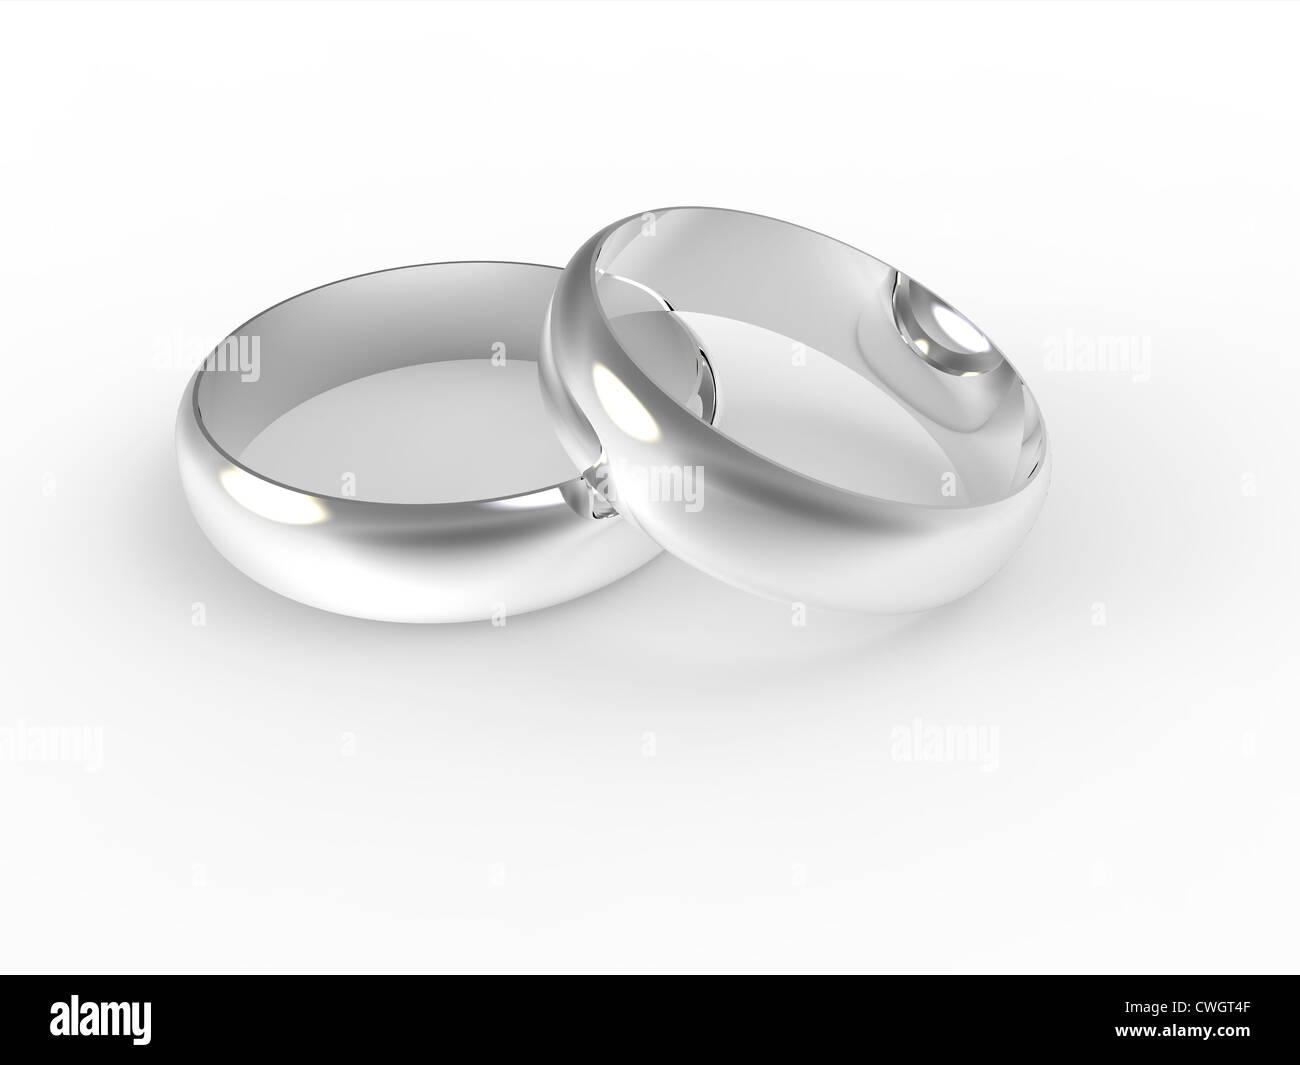 Silver wedding rings isolated on white background Stock Photo - Alamy